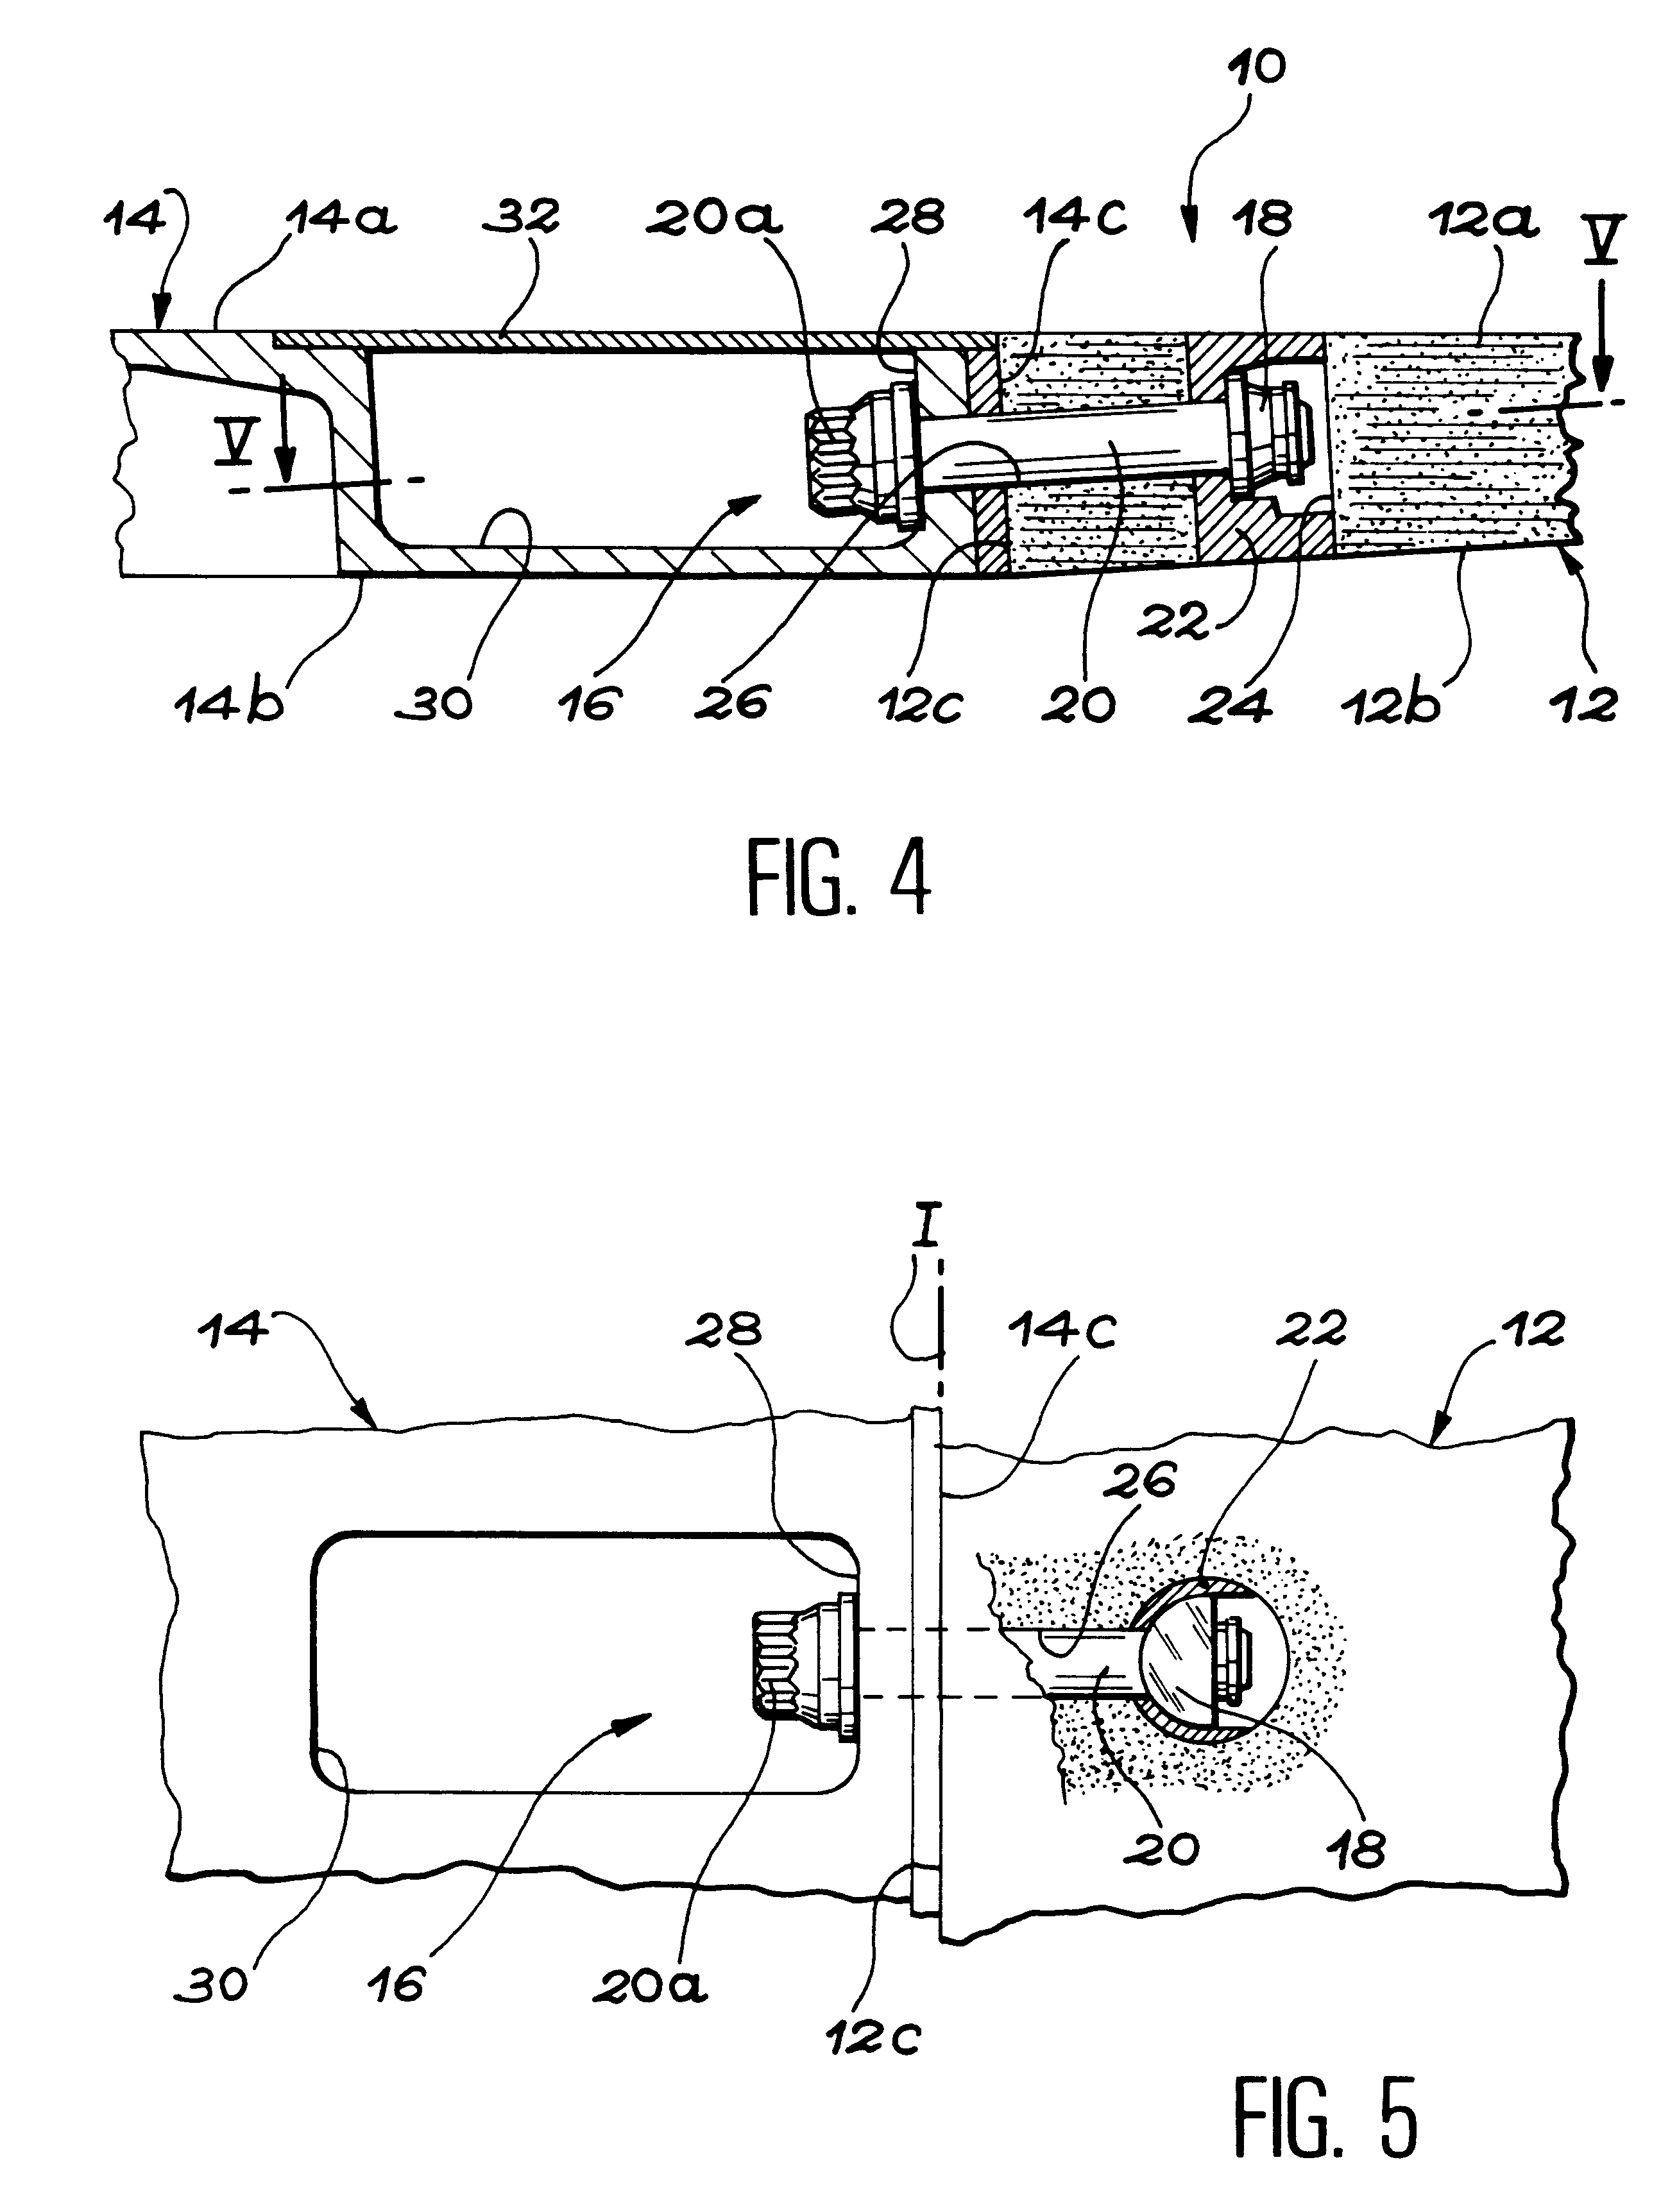 Device for joining a panel and a structure, able to transmit significant forces